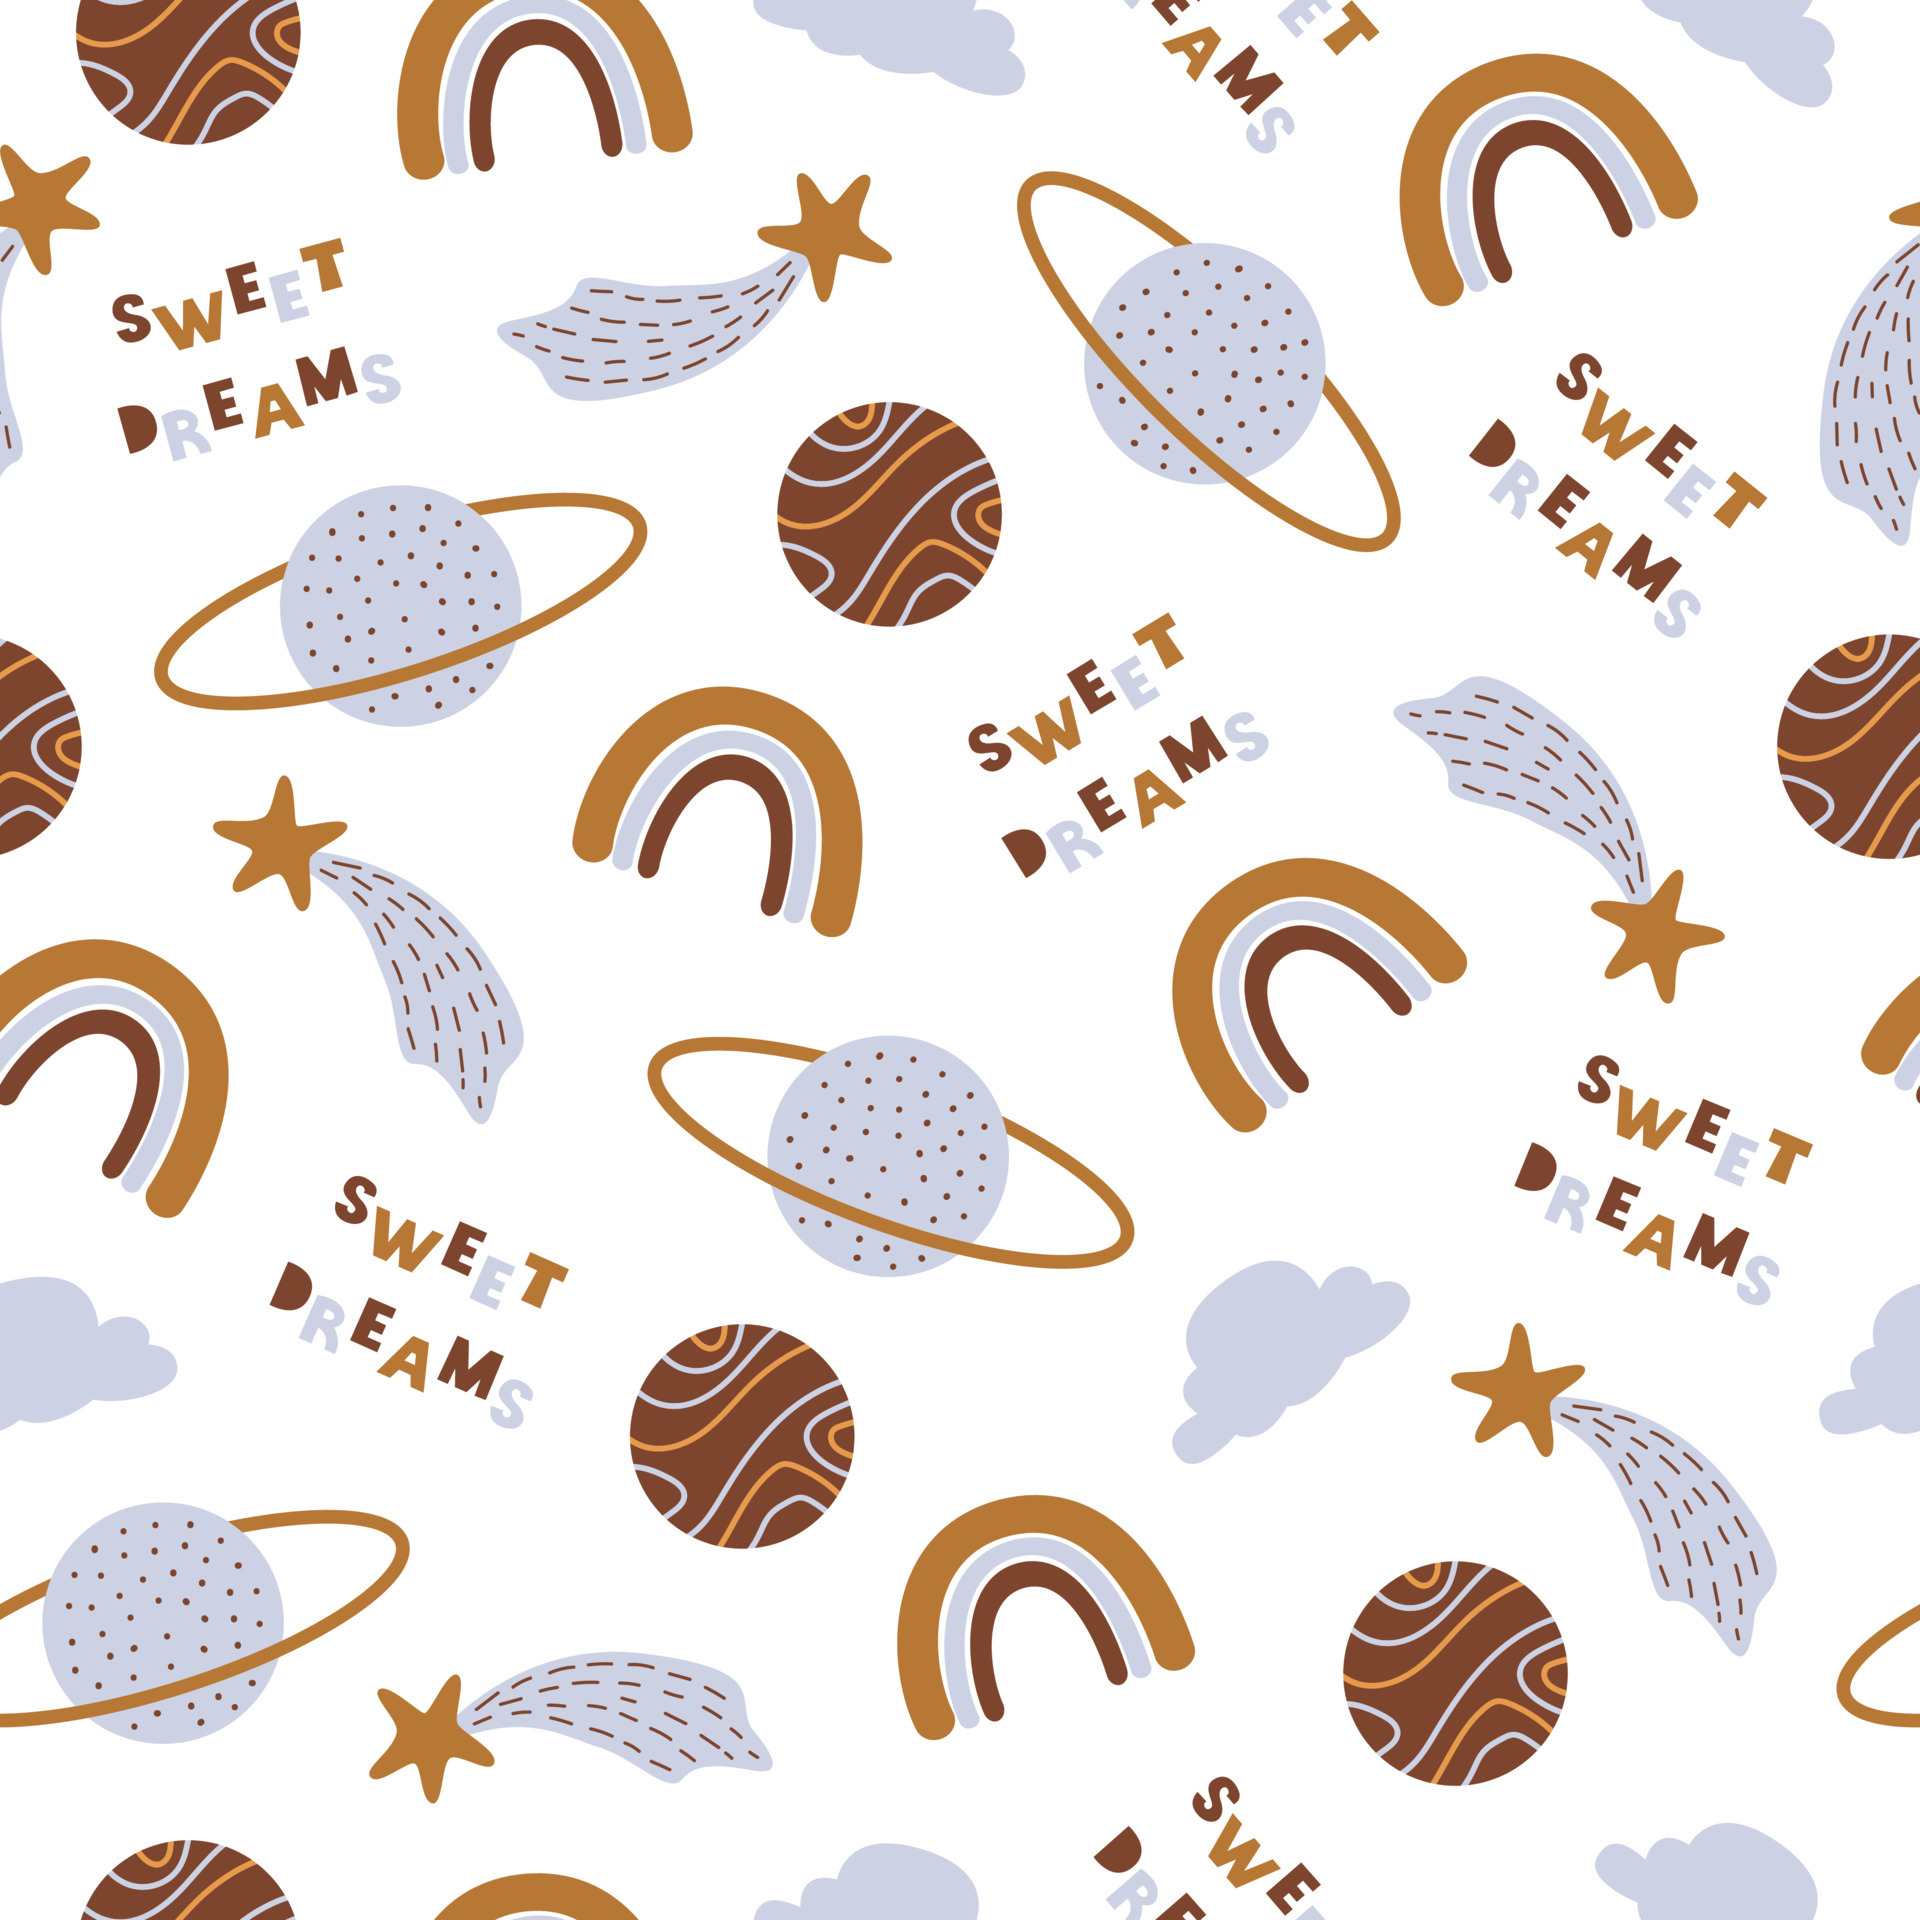 Hand drawn pattern. Hand drawn seamless pattern with lettering